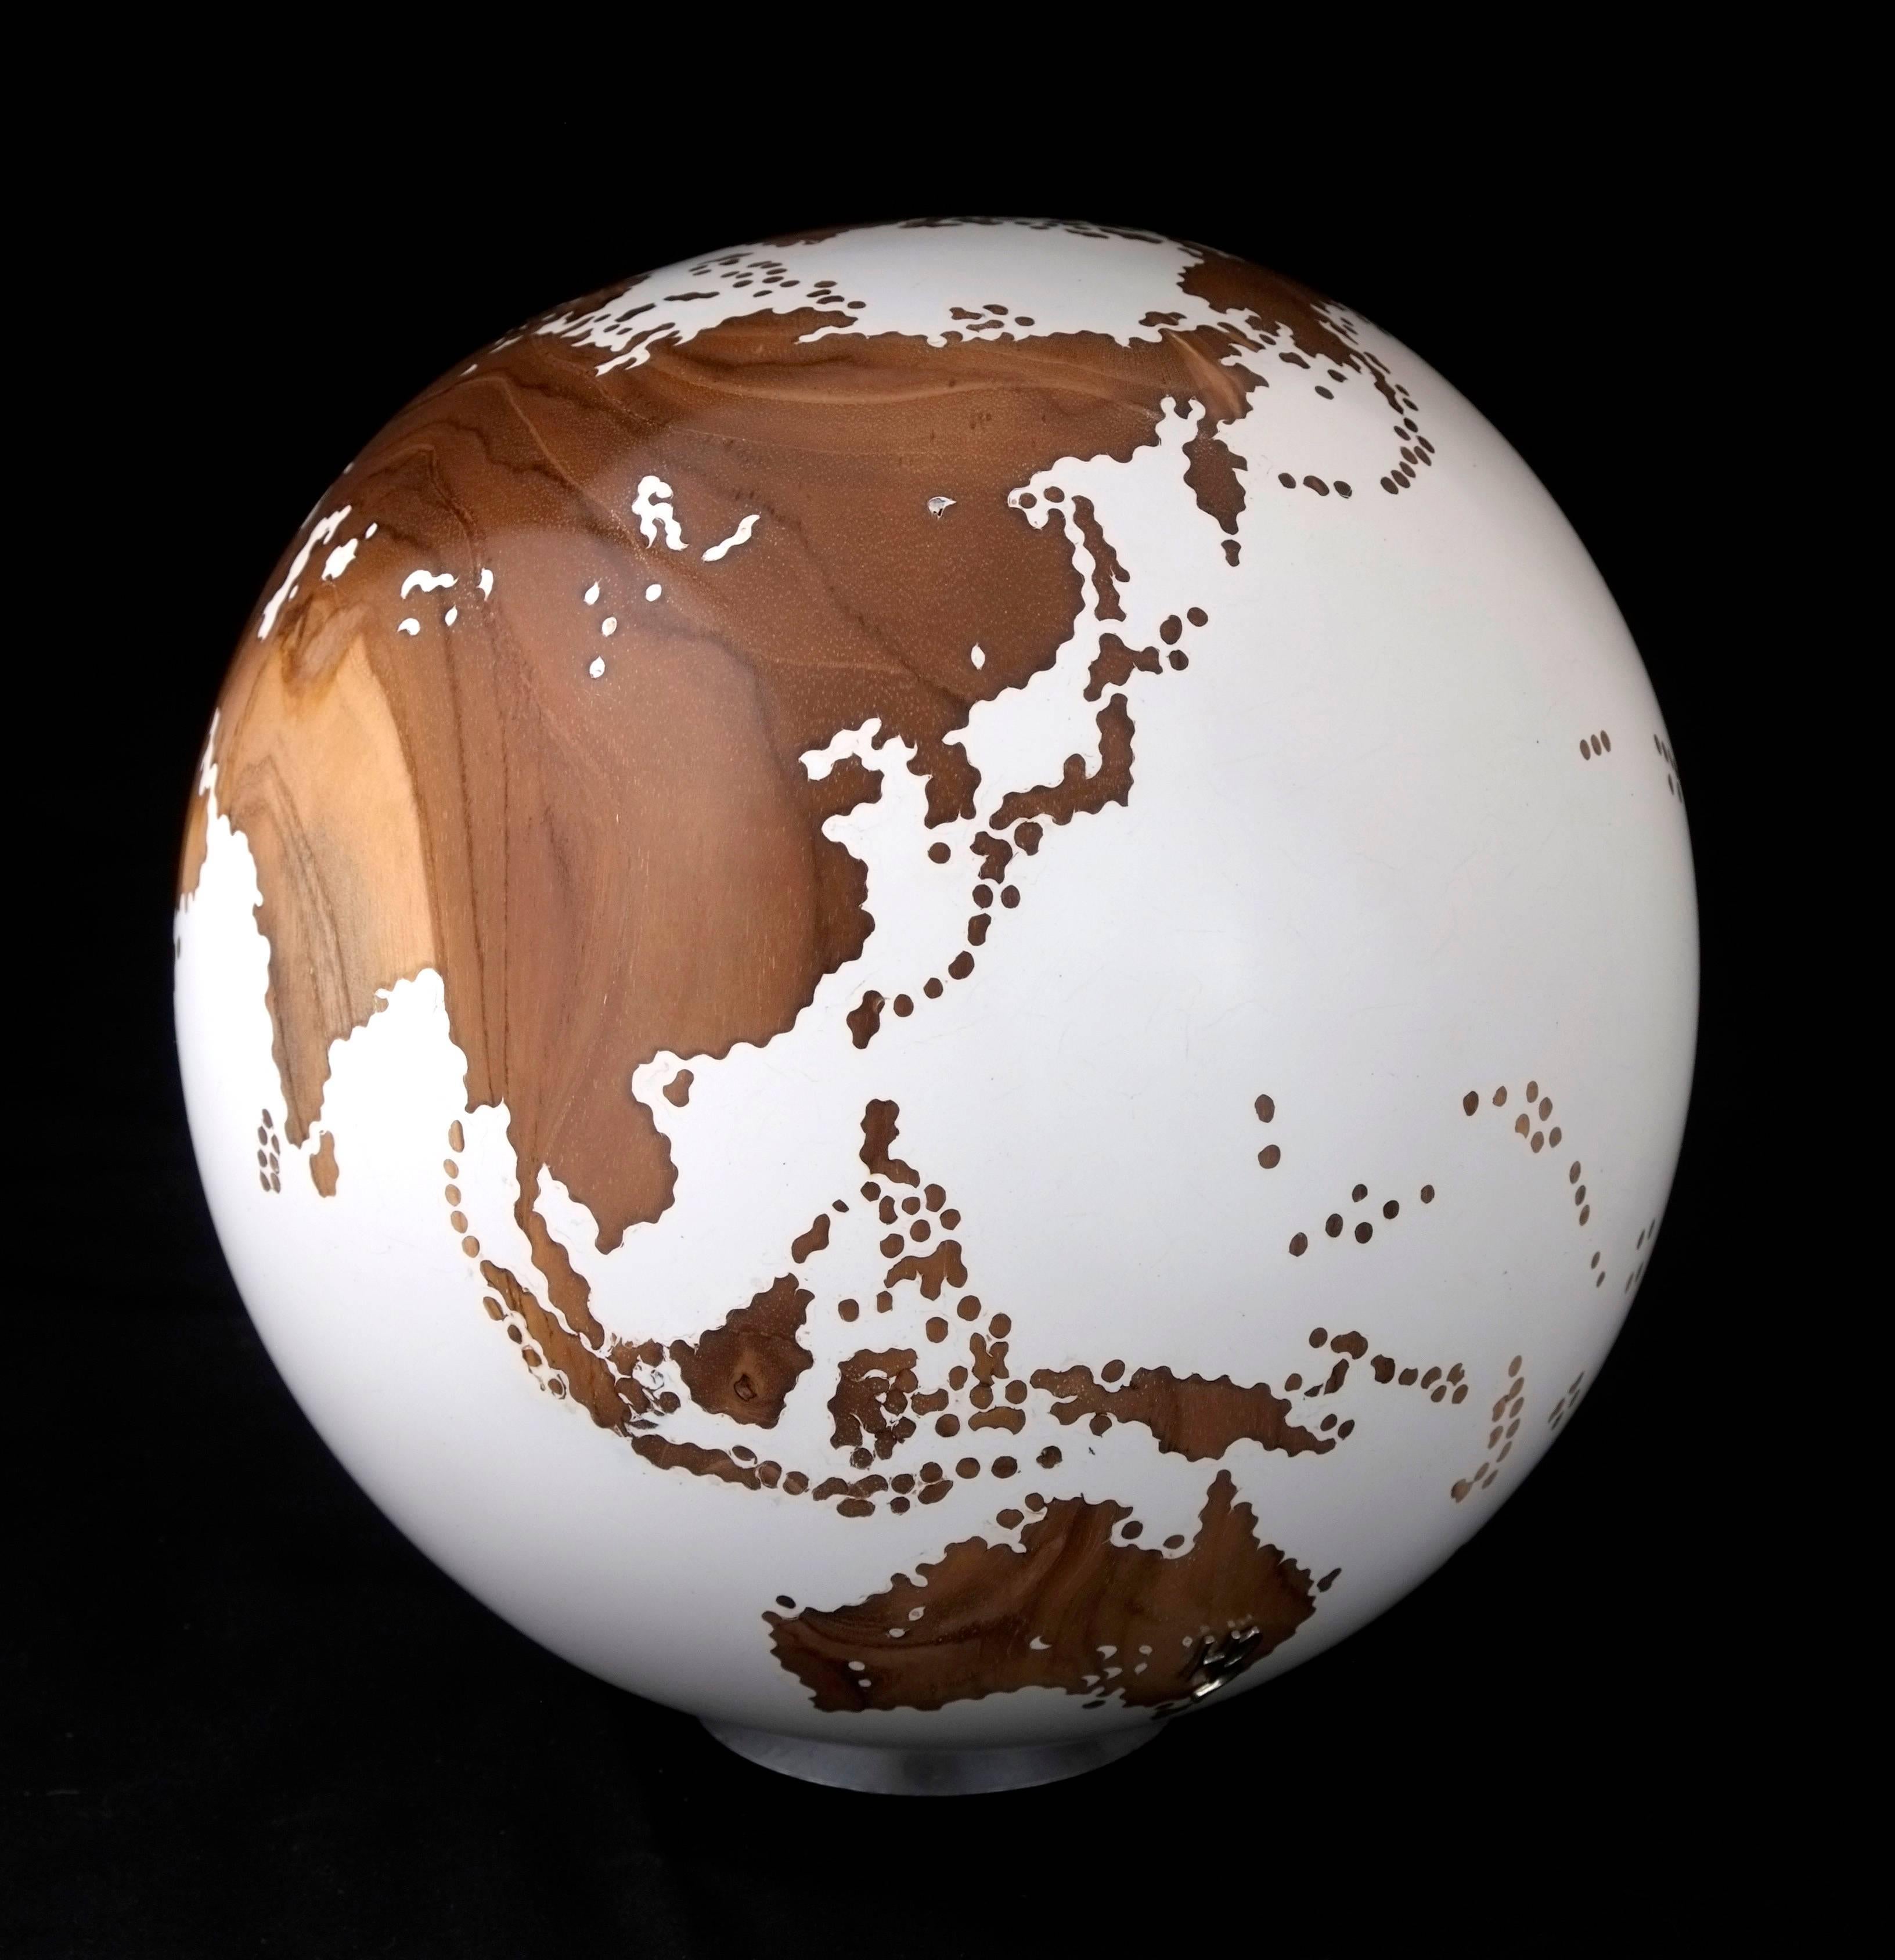 Organic Modern Contemporary Wooden Globe from Teak Root with Acrylic White Resin Finish, 20cm